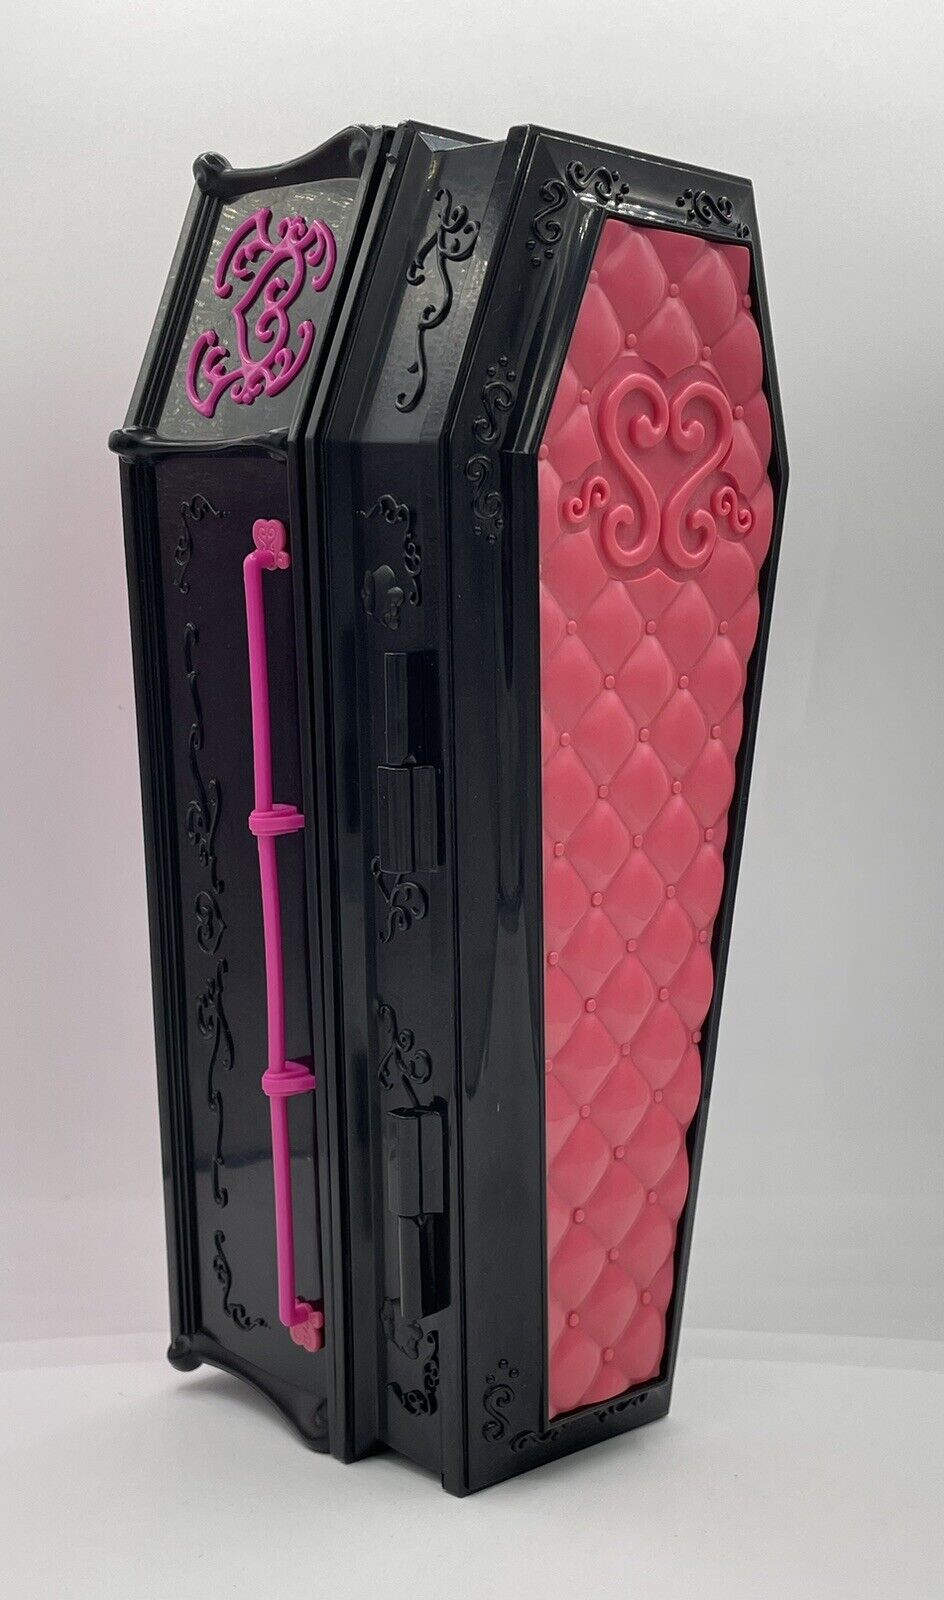 Monster High Dead Tired Draculaura Doll Coffin Bed Jewelry Box